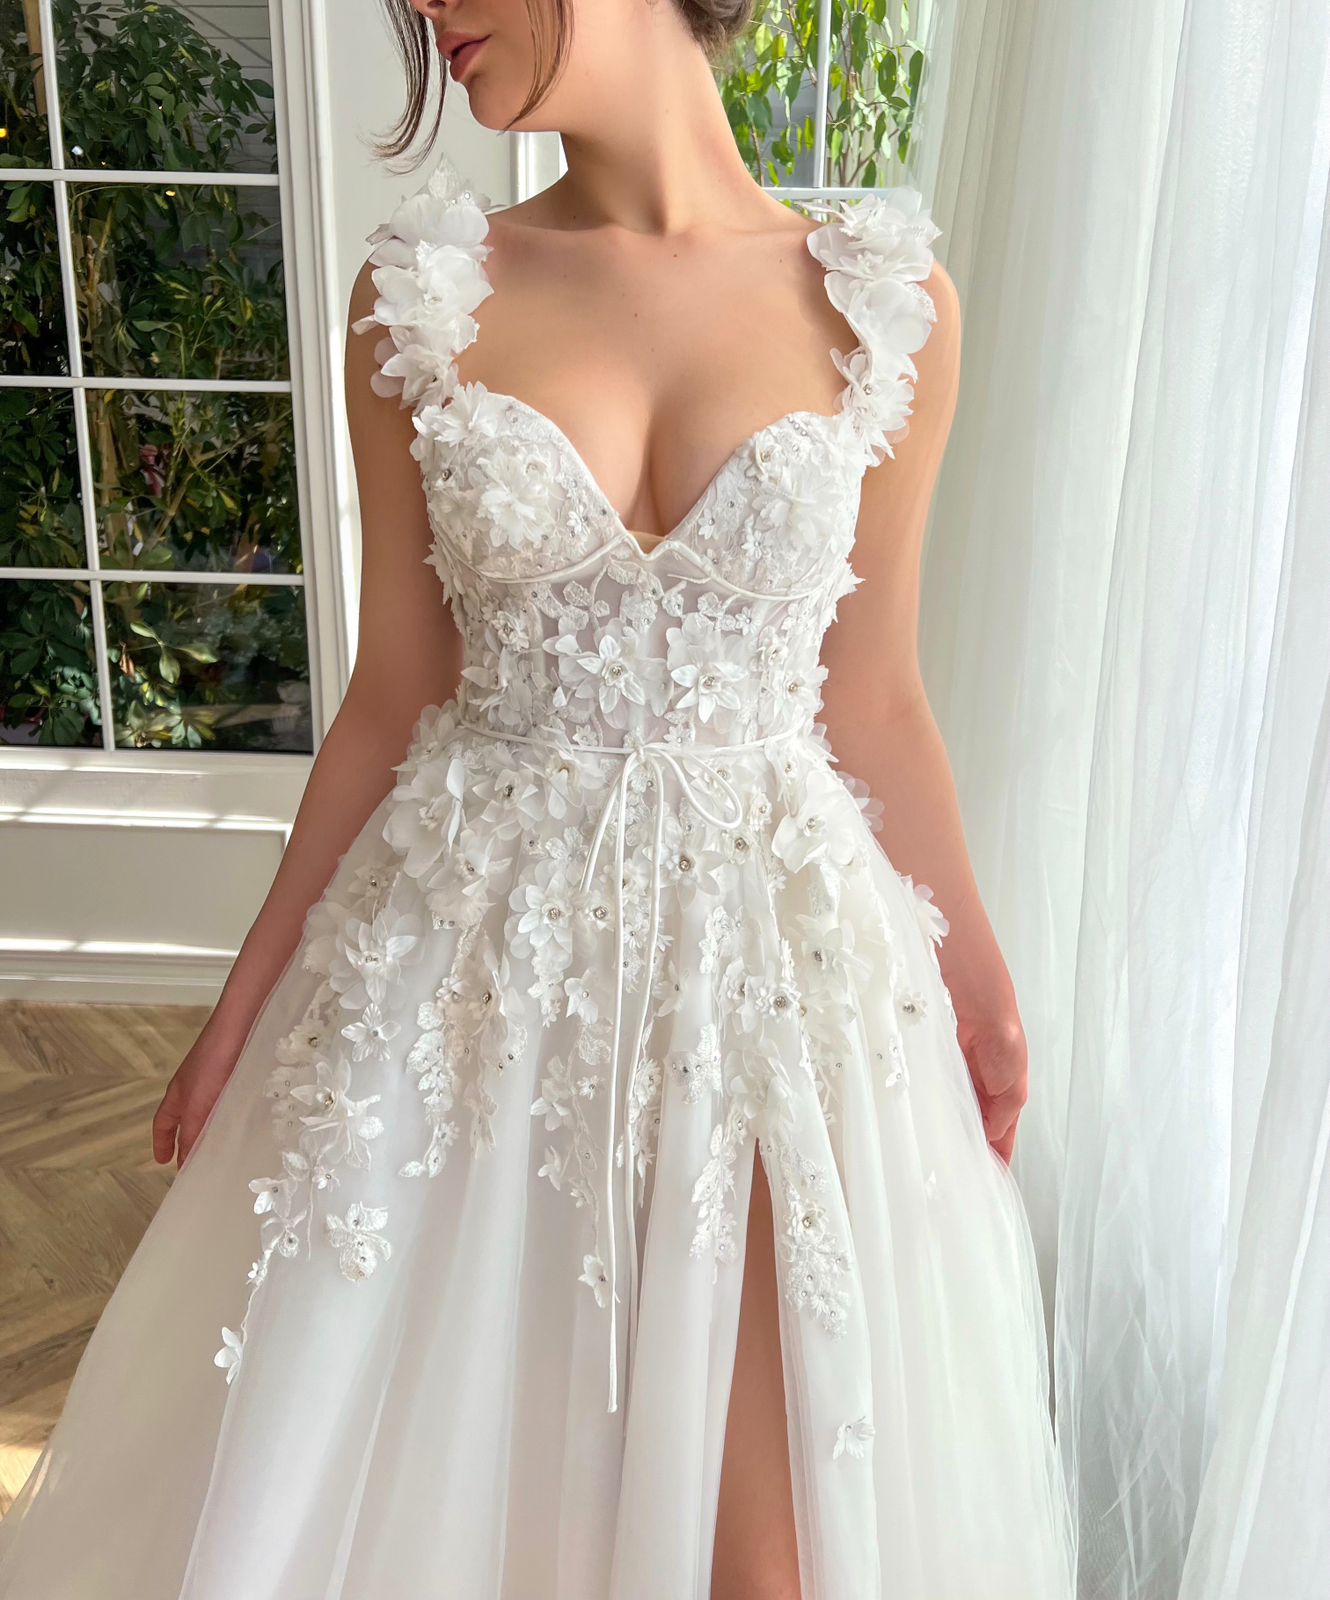 White A-Line bridal dress with straps, v-neck and embroidery